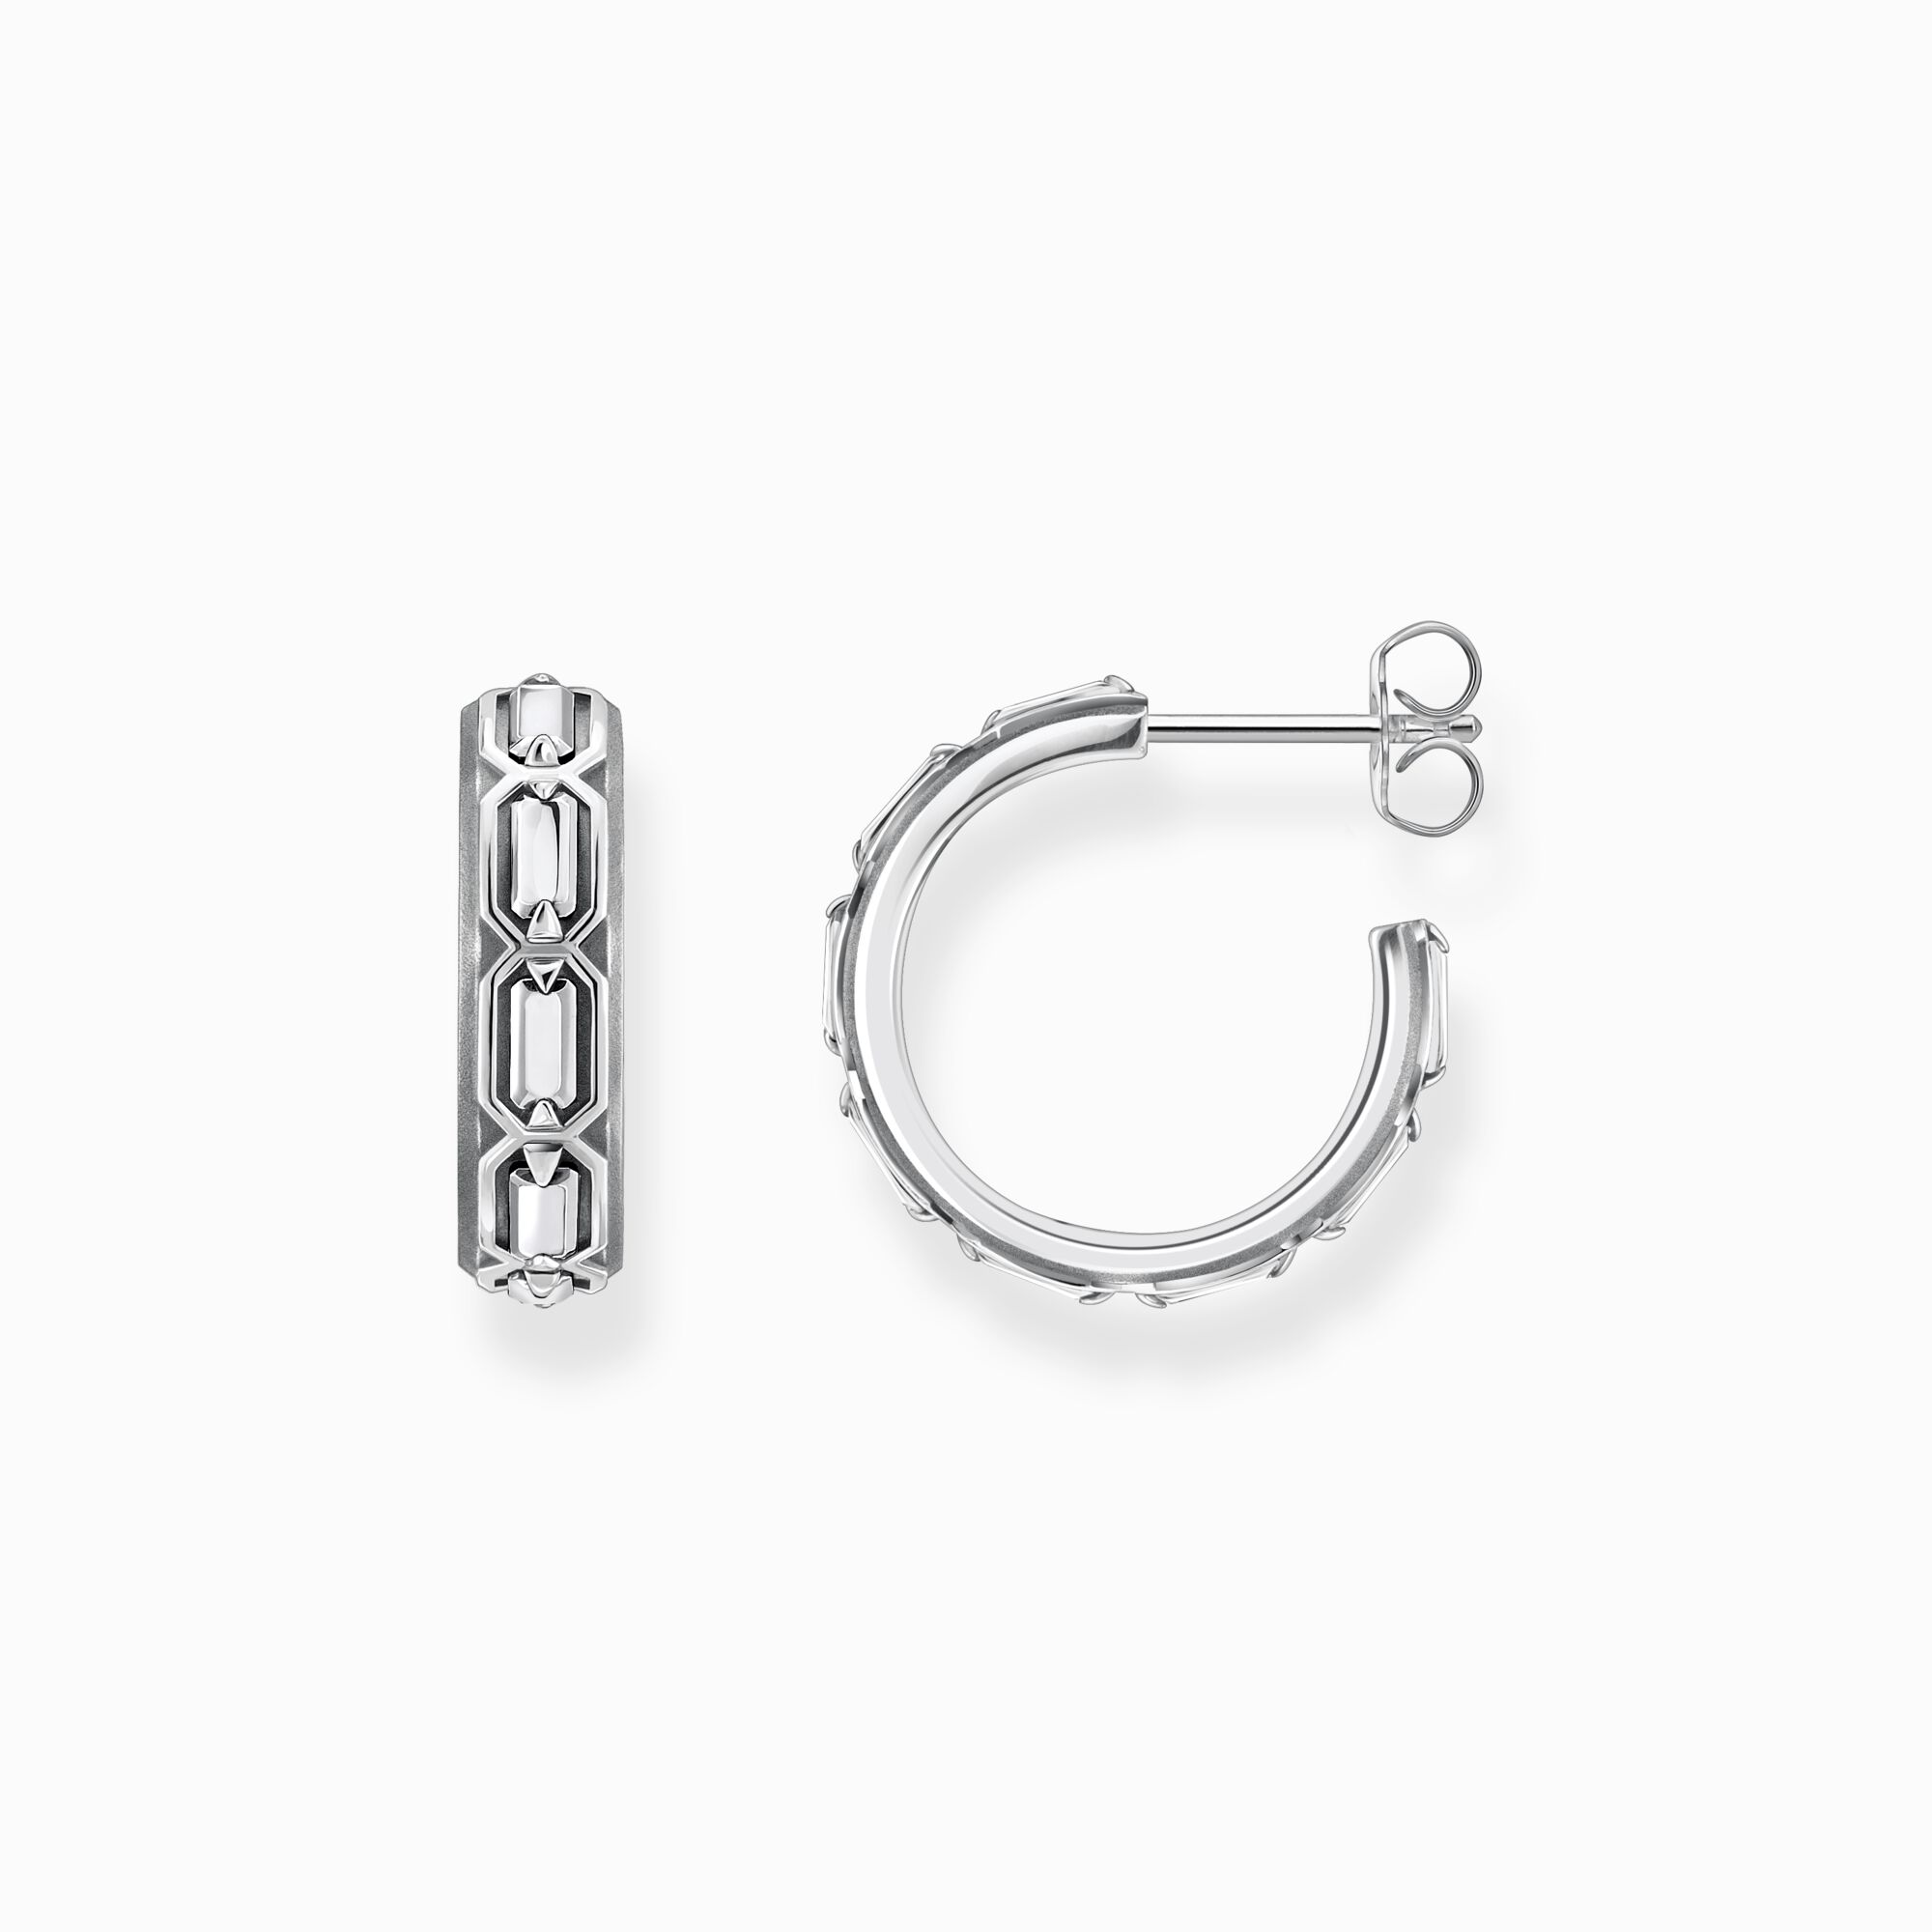 Blackened silver hoop ear rings crocodile shell structure from the  collection in the THOMAS SABO online store